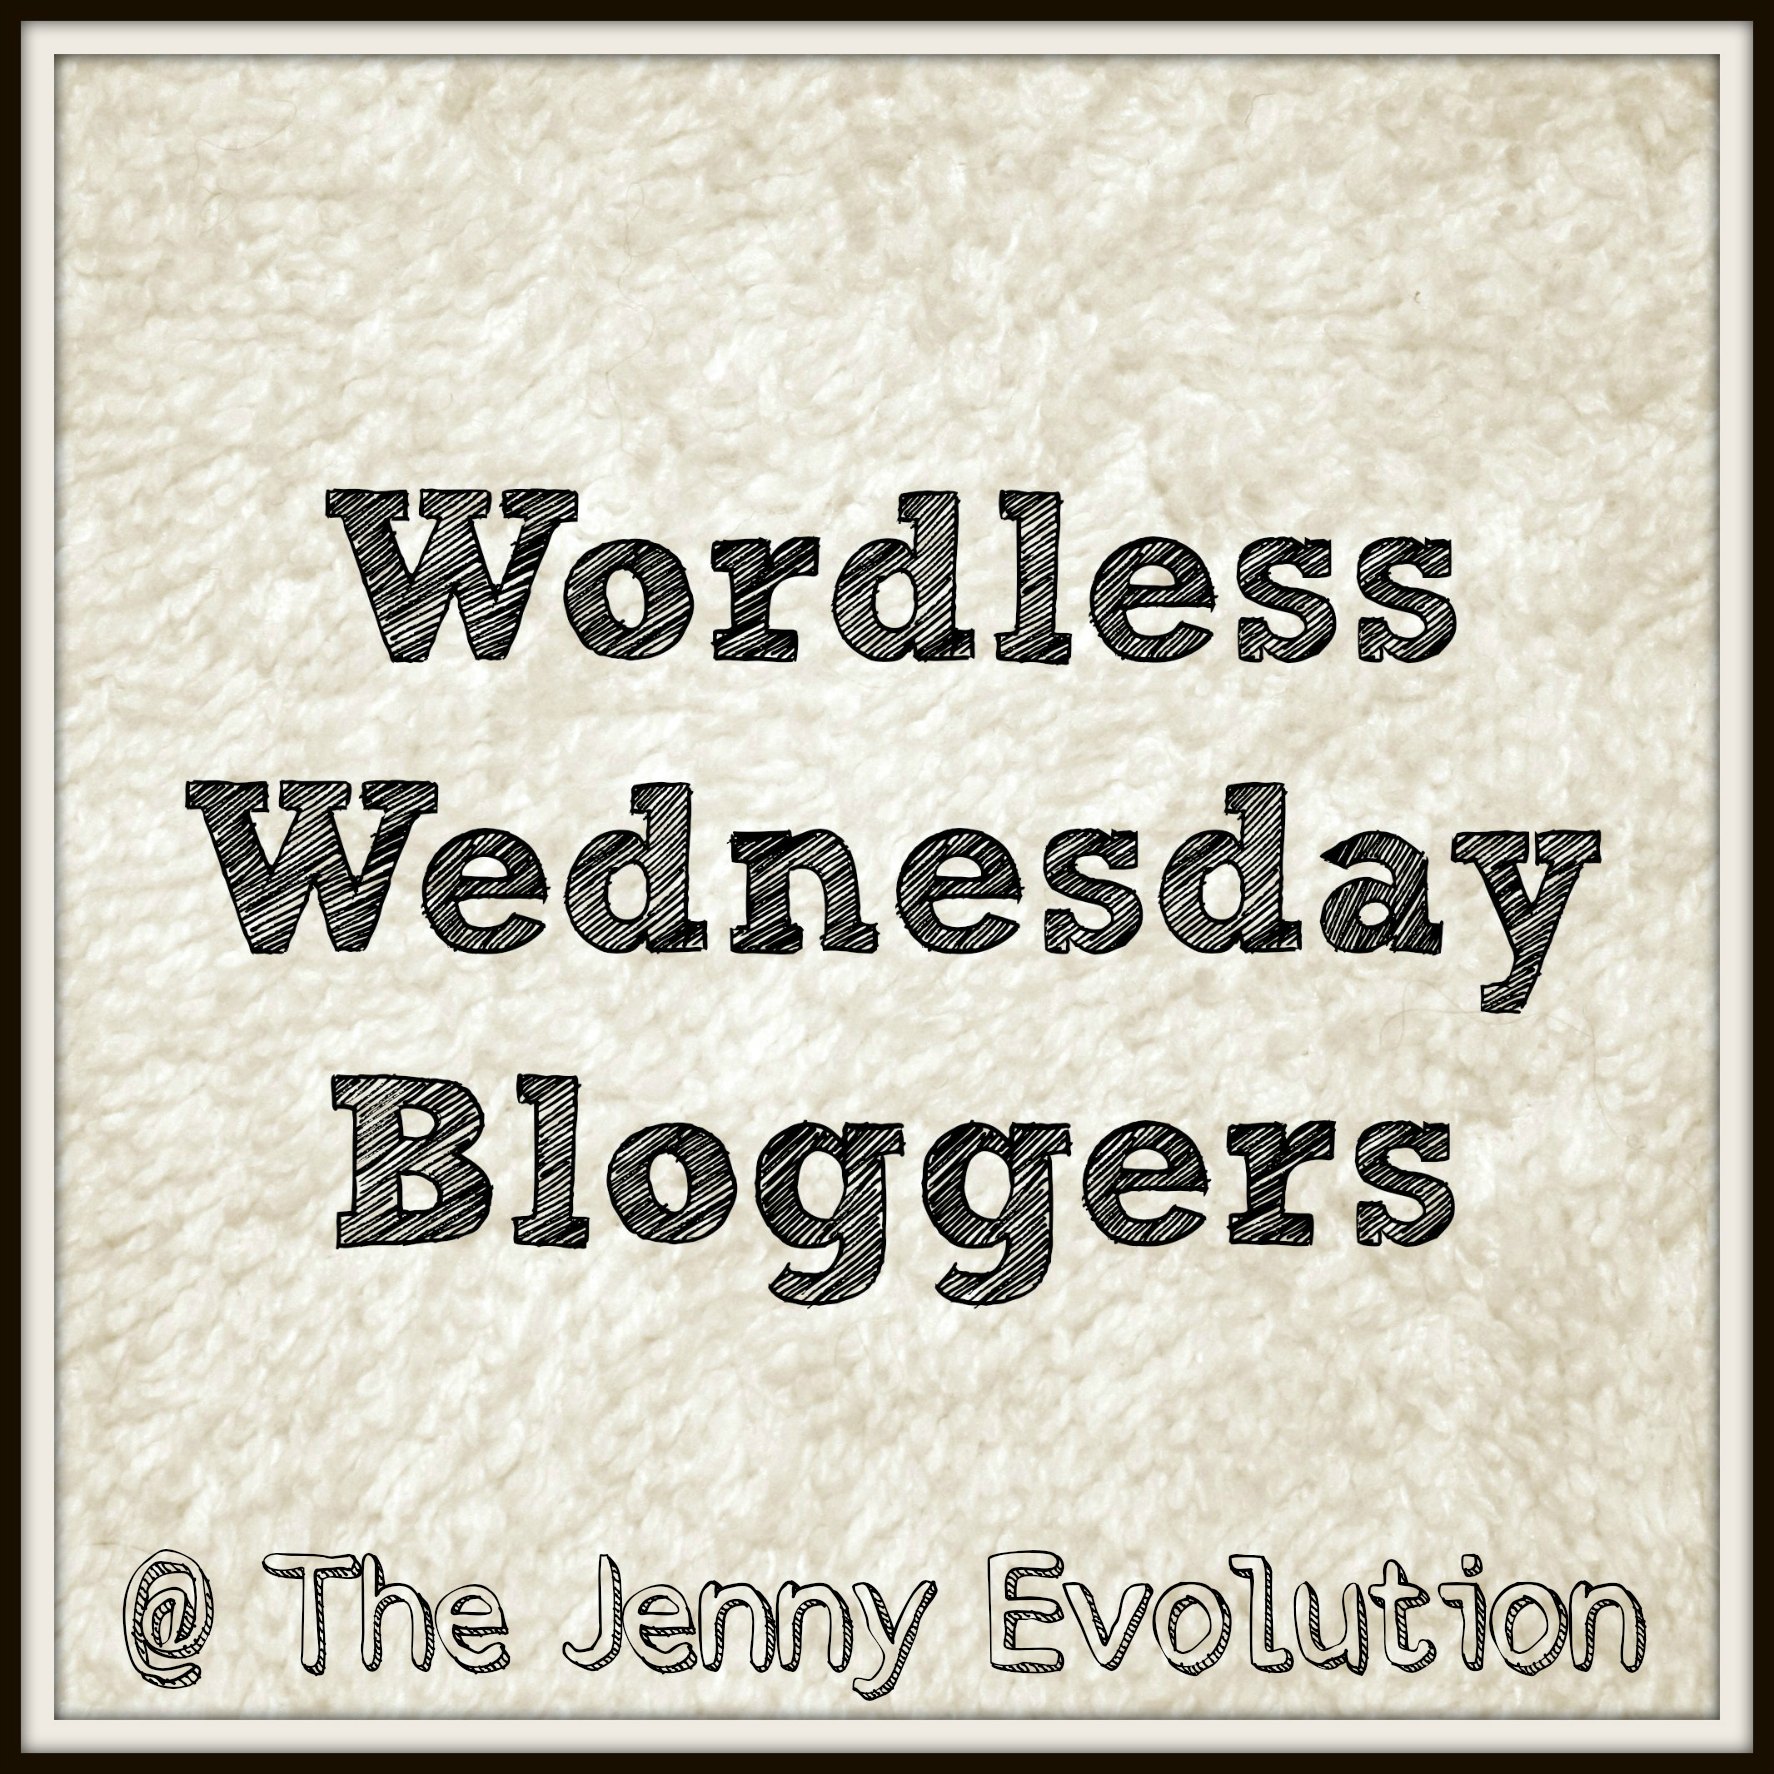 Wordless Wednesday at Mommy Evolution